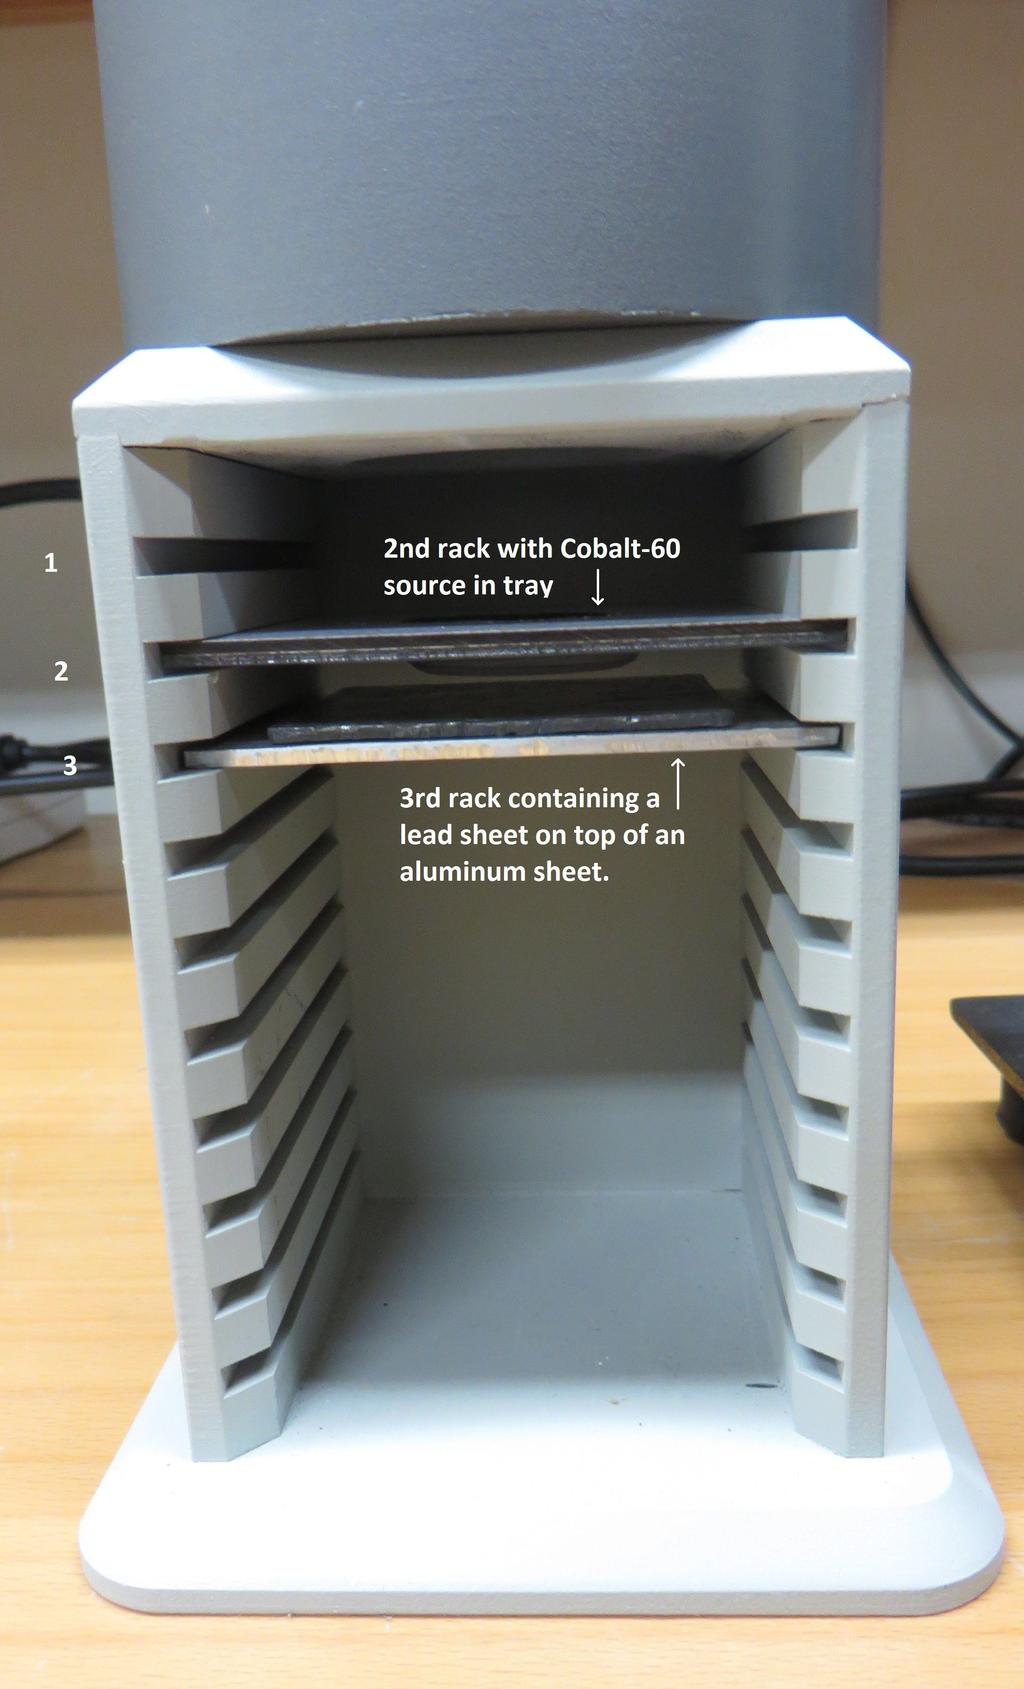 Figure 8: The source is kept on its tray on the second rack in the shelf. The lead sheet for enhanced backscattering is kept on an aluminum sheet which is kept on the third rack in the shelf. 1.